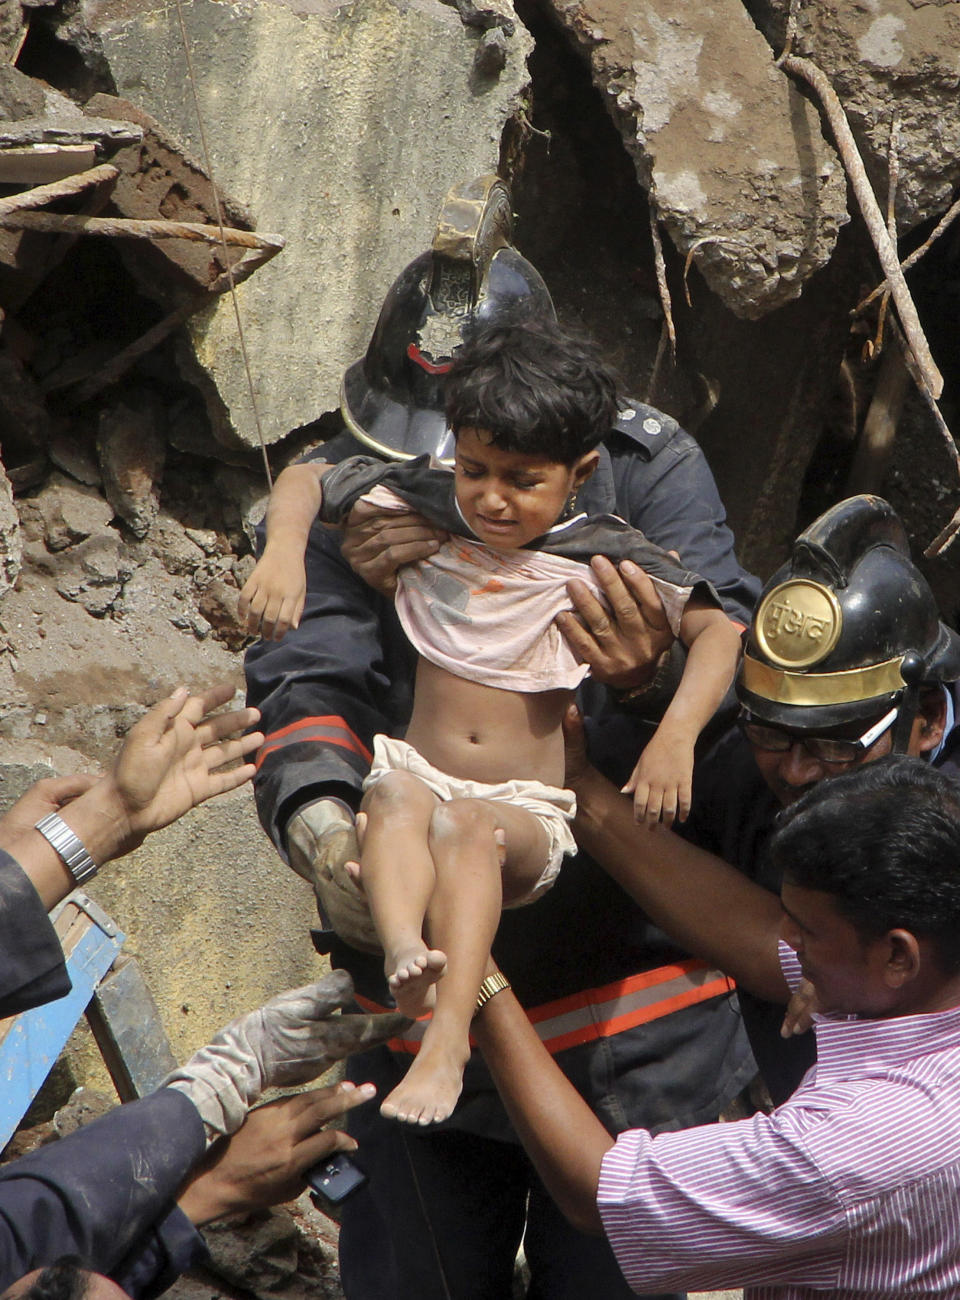 Indian Fire officials rescue a girl from the debris of a collapsed building in Mumbai, India, Friday, Sept. 27, 2013. The multi-story residential building collapsed in India's financial capital of Mumbai early Friday, killing at least three people and sending rescuers racing to reach dozens of people feared trapped in the rubble. (AP)